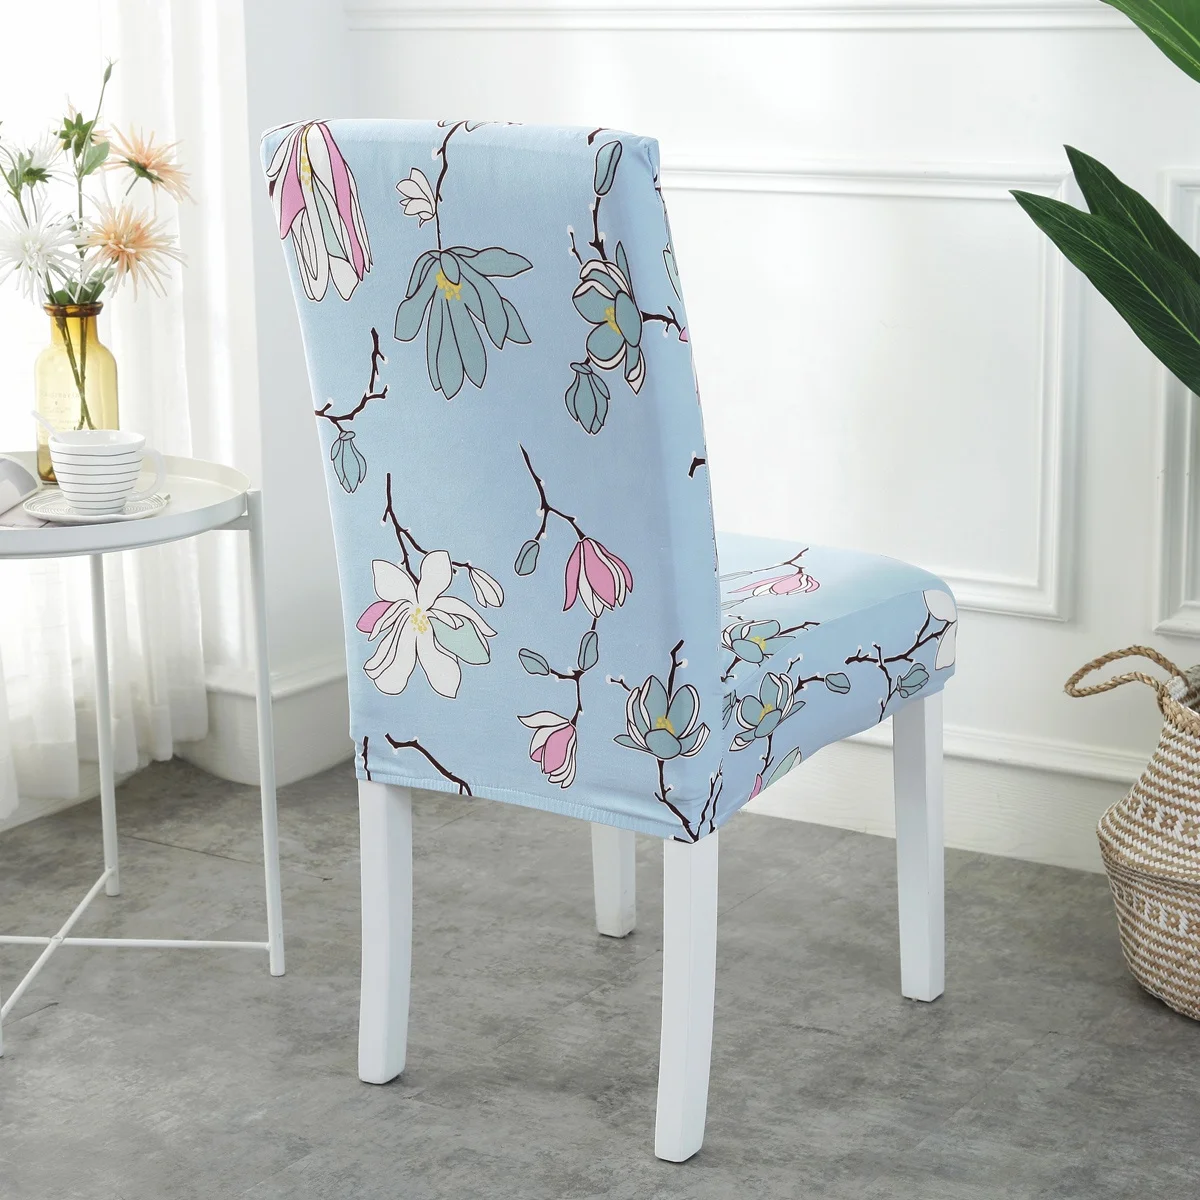 
Four Seasons universal dining chair covers elastic chair cover spandex chair cover 